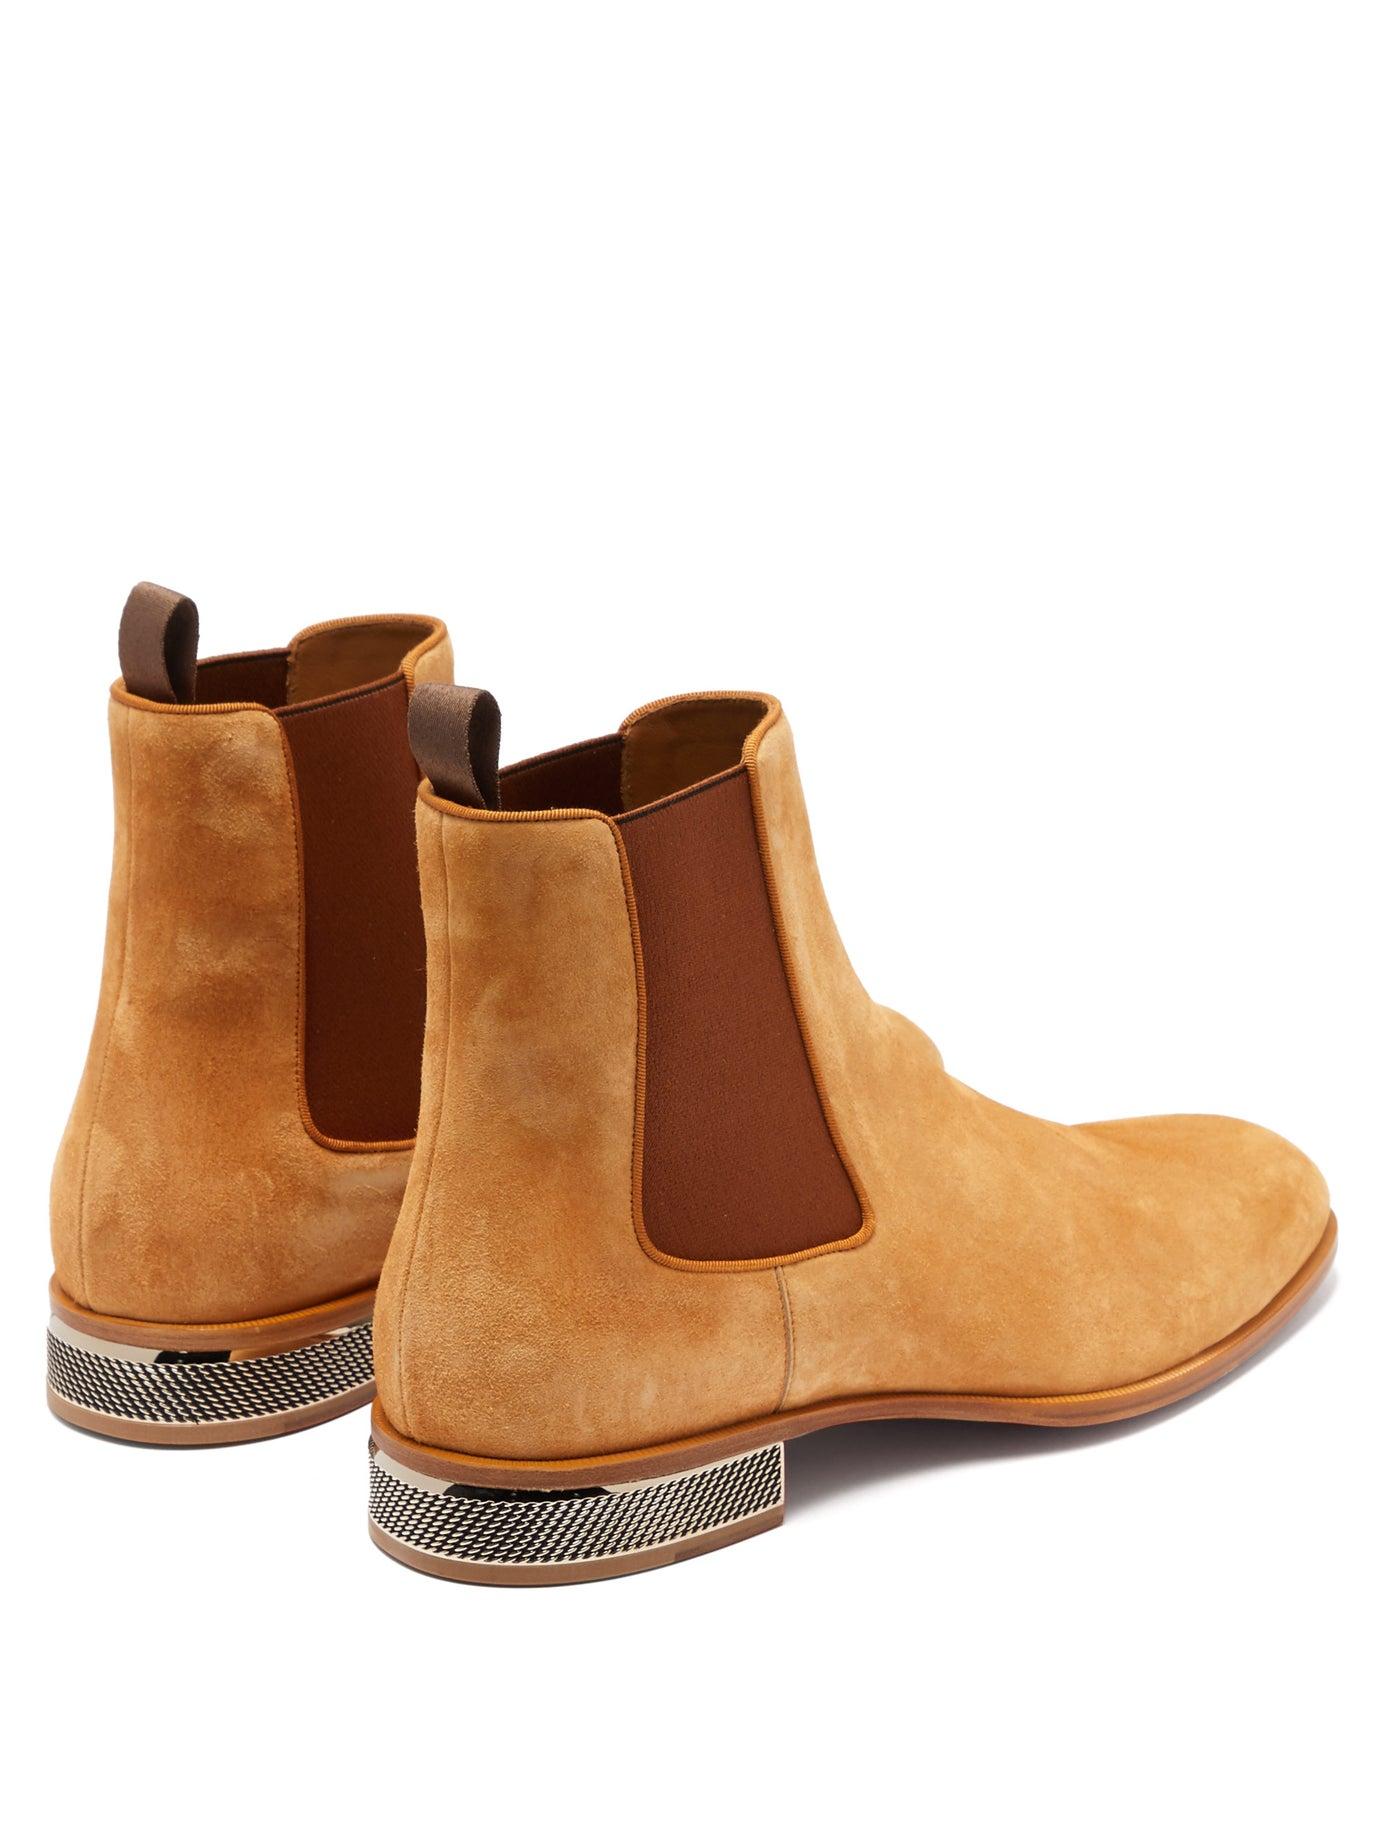 Christian Louboutin Samsocool Suede Chelsea Boots in Beige (Natural